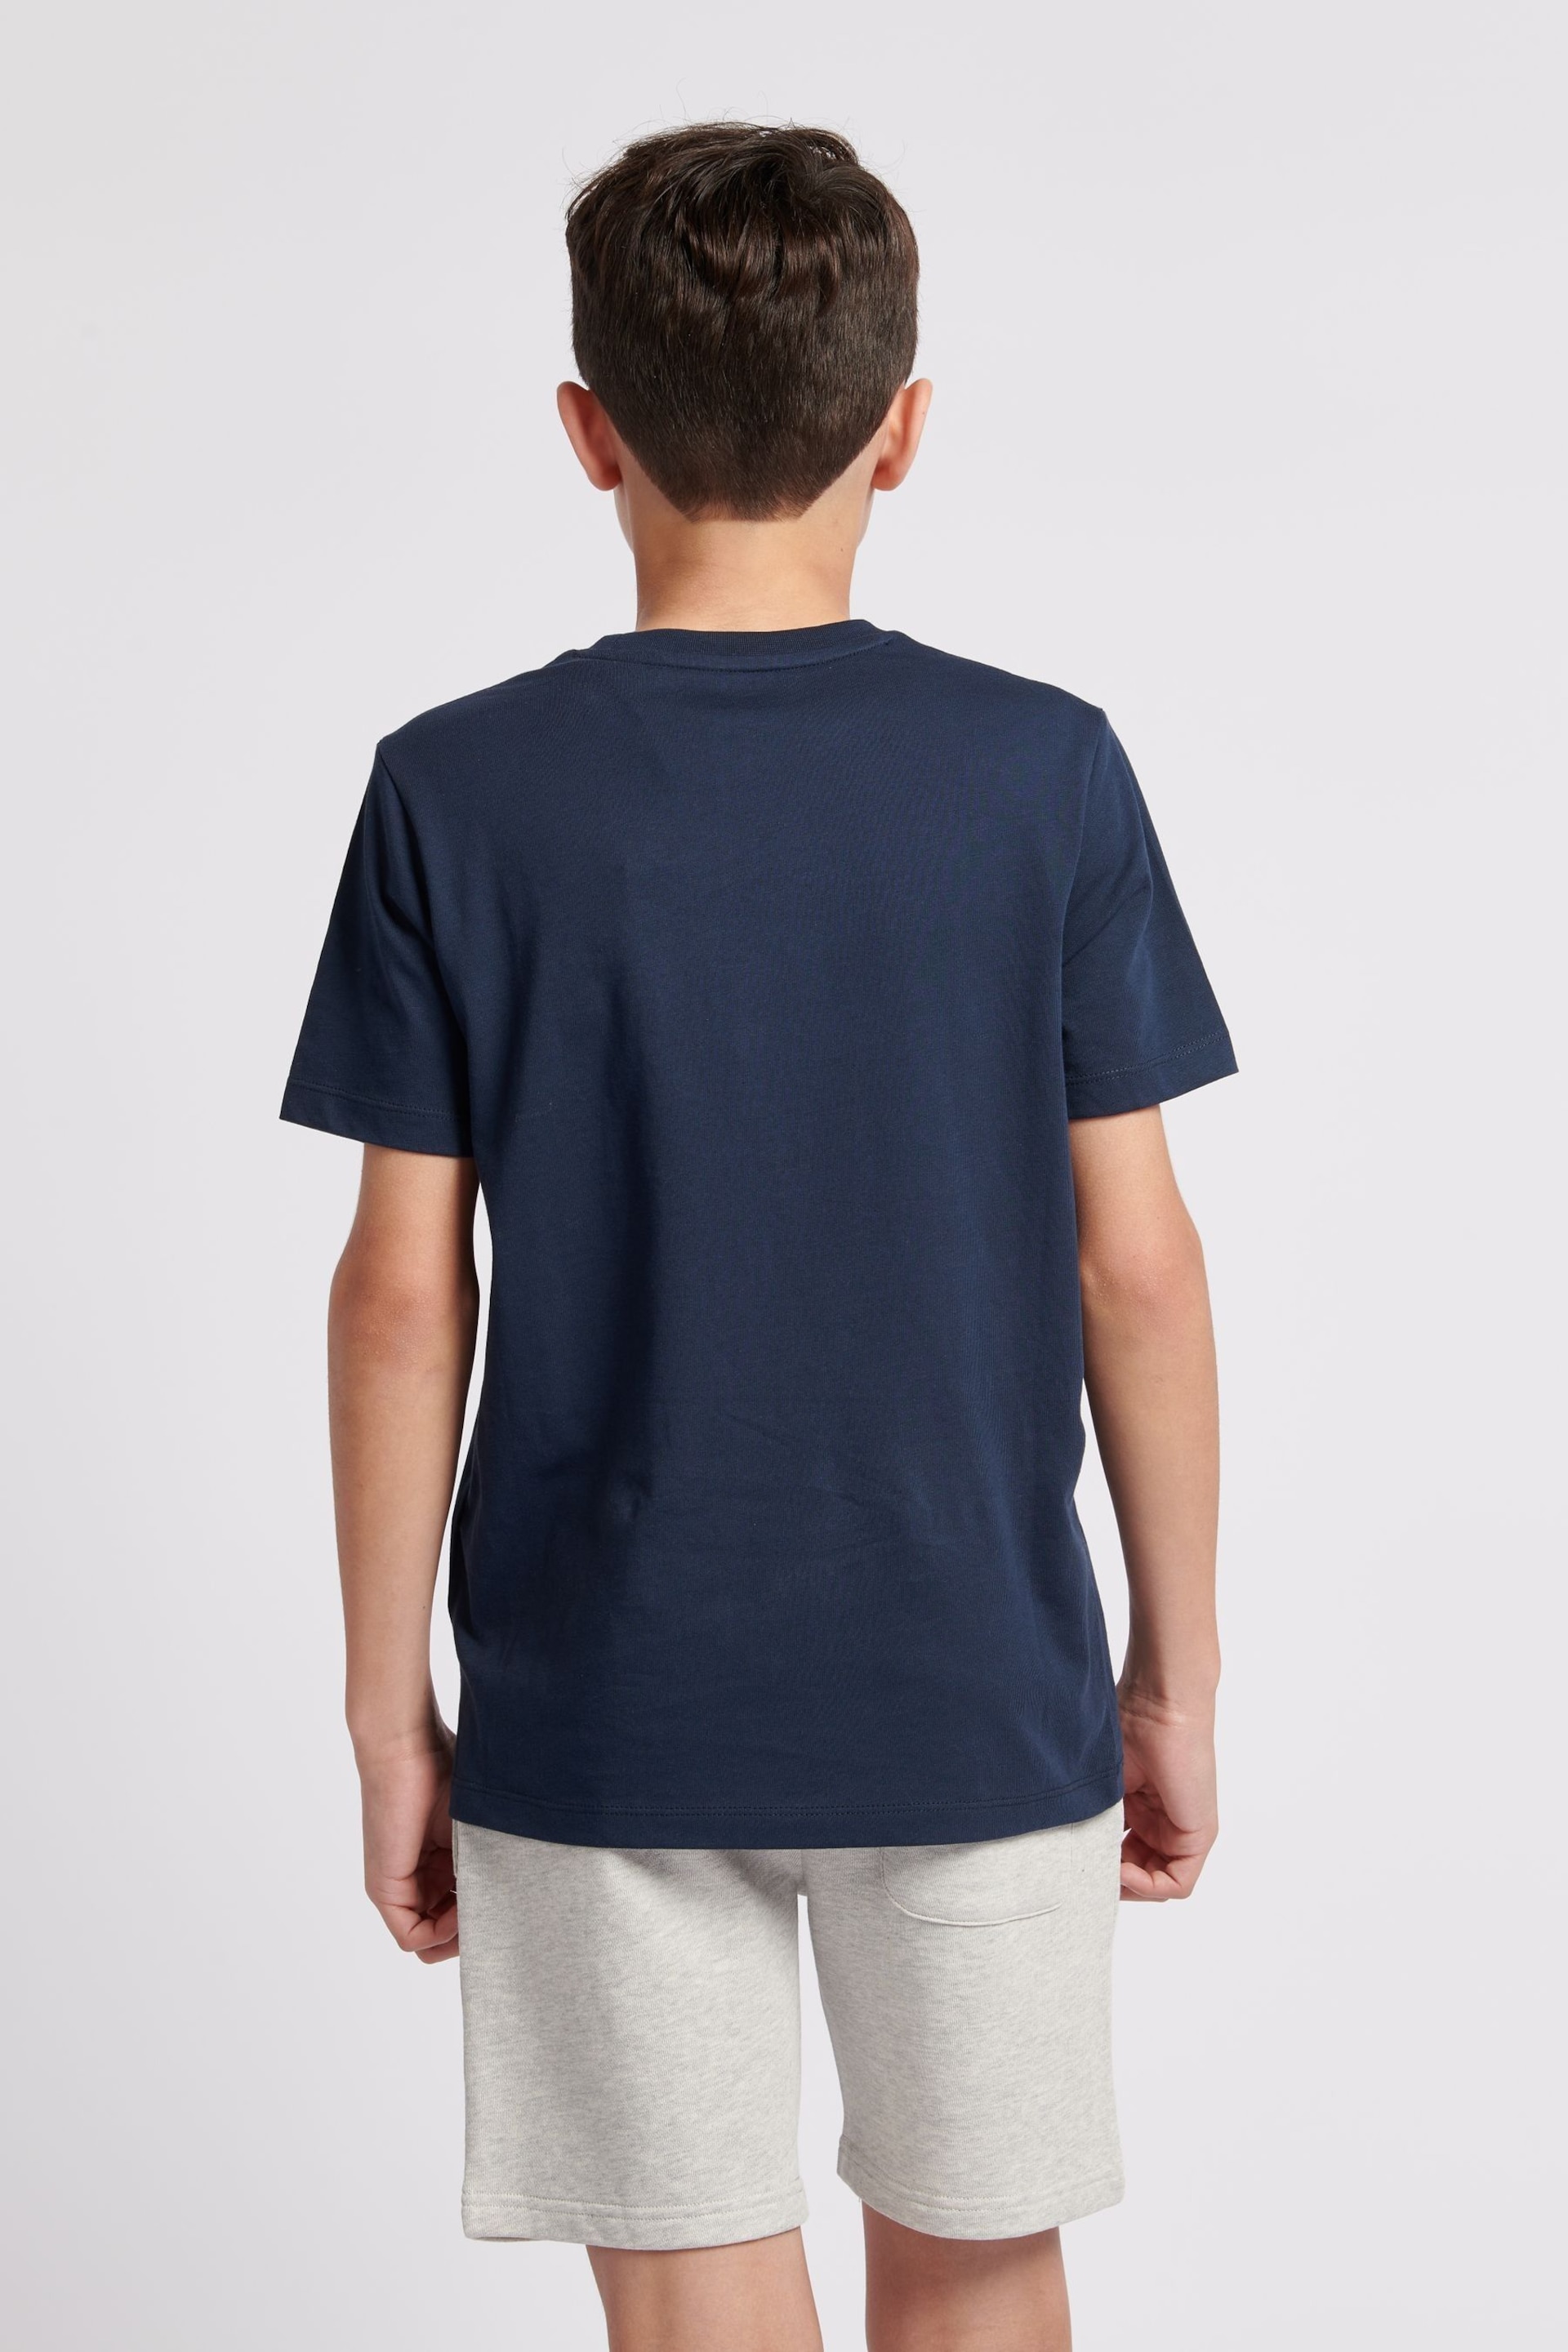 Jack Wills Boys Regular Fit Carnaby T-Shirt - Image 2 of 6